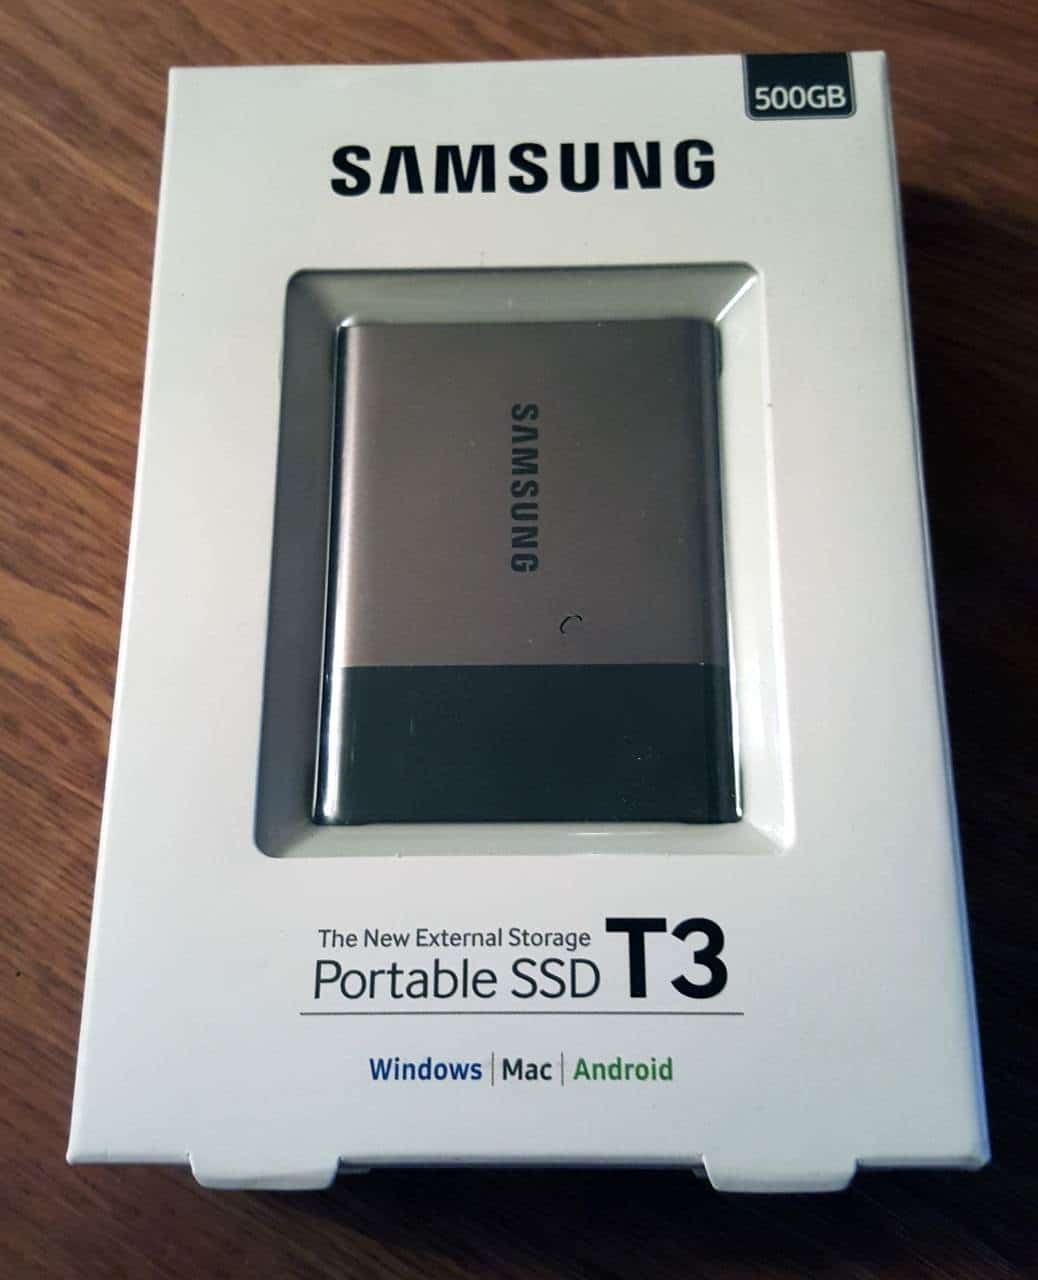 Samsung Portable SSD T3 - good things still come in packages - Bjorn3D.com